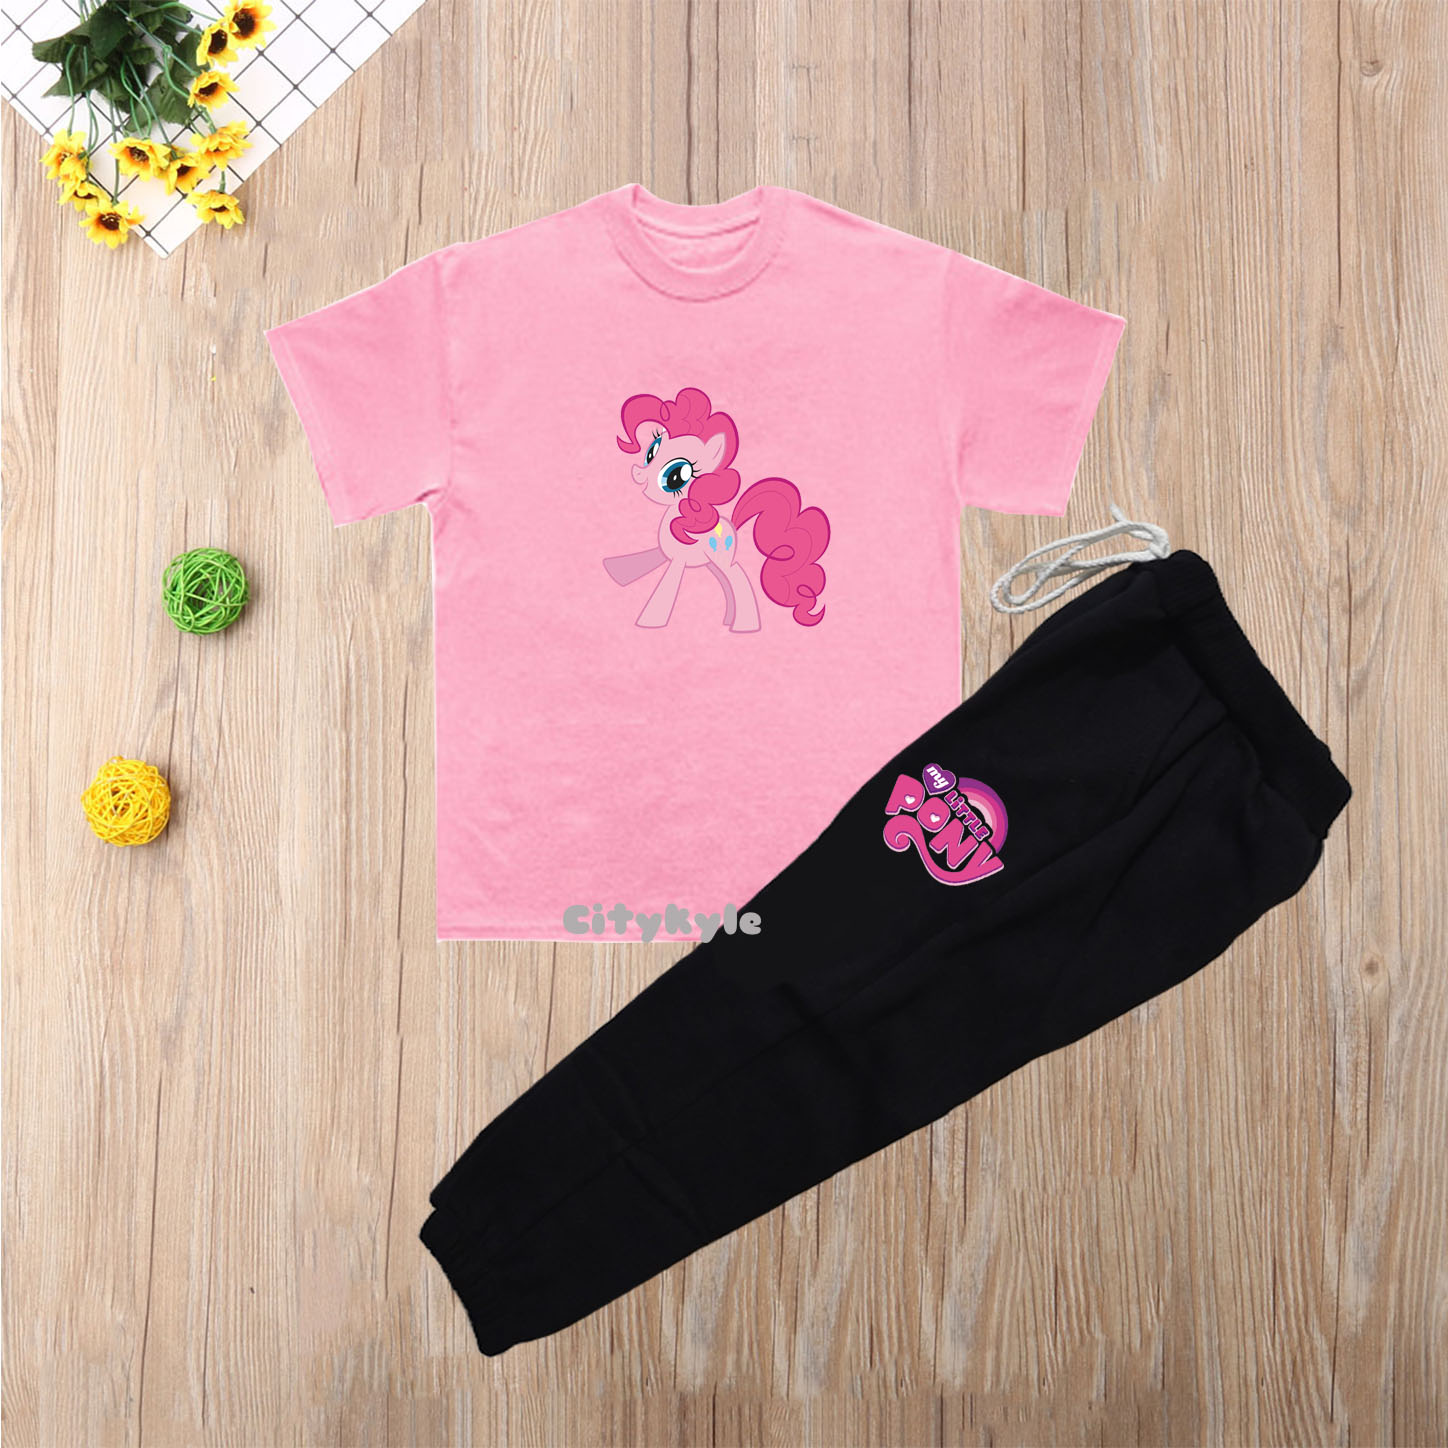 My Little Pony Pajamas Girls Size 18 Months Baby Outfit Sleep Set NEW  Pinkie Top